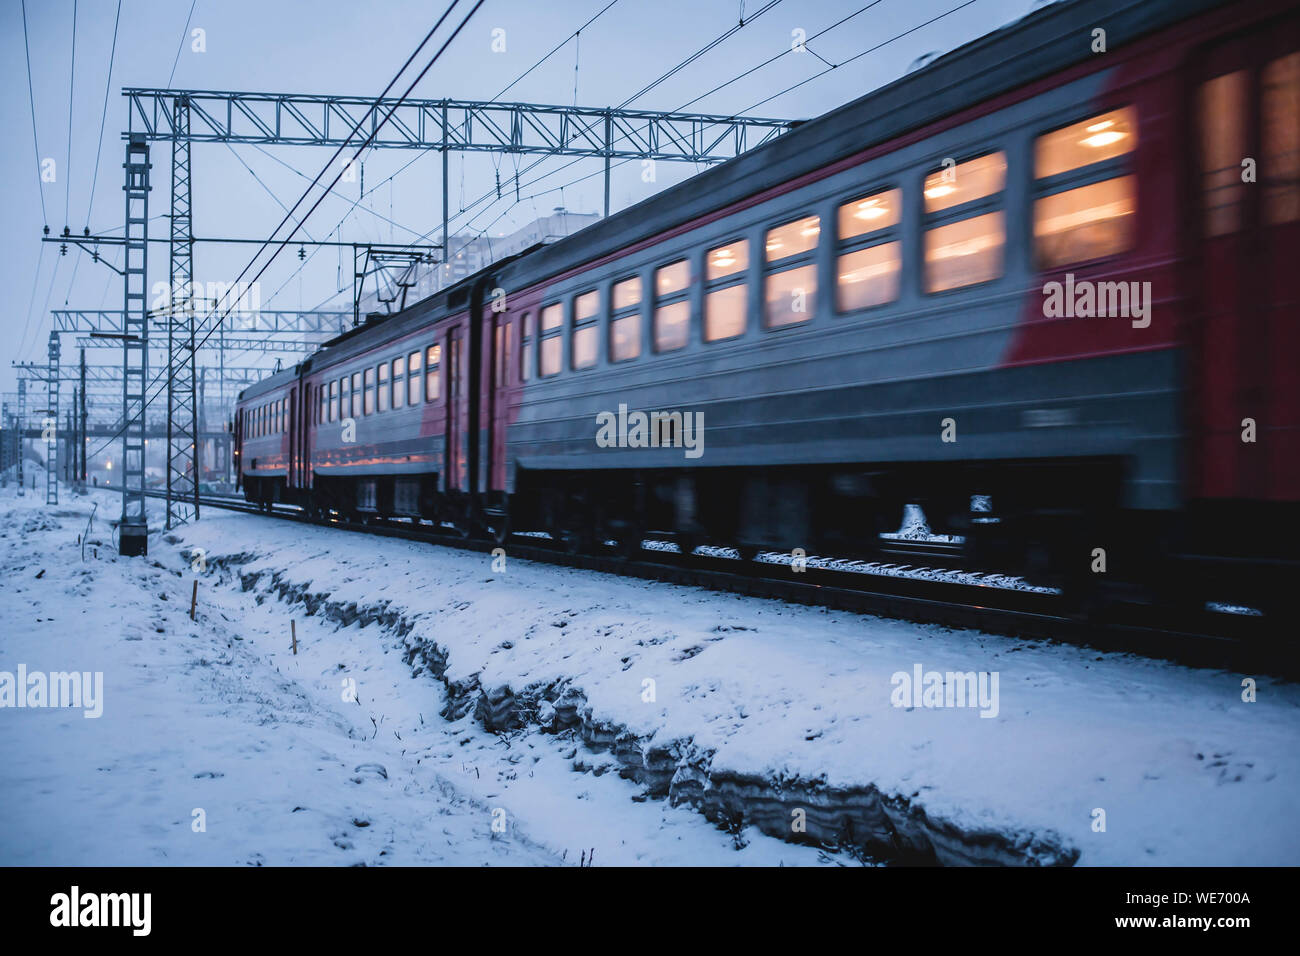 Train passing at speed in the snow. Lights are on inside the carriage. Passengers making their way home from work on a commuter train in the evening. Stock Photo